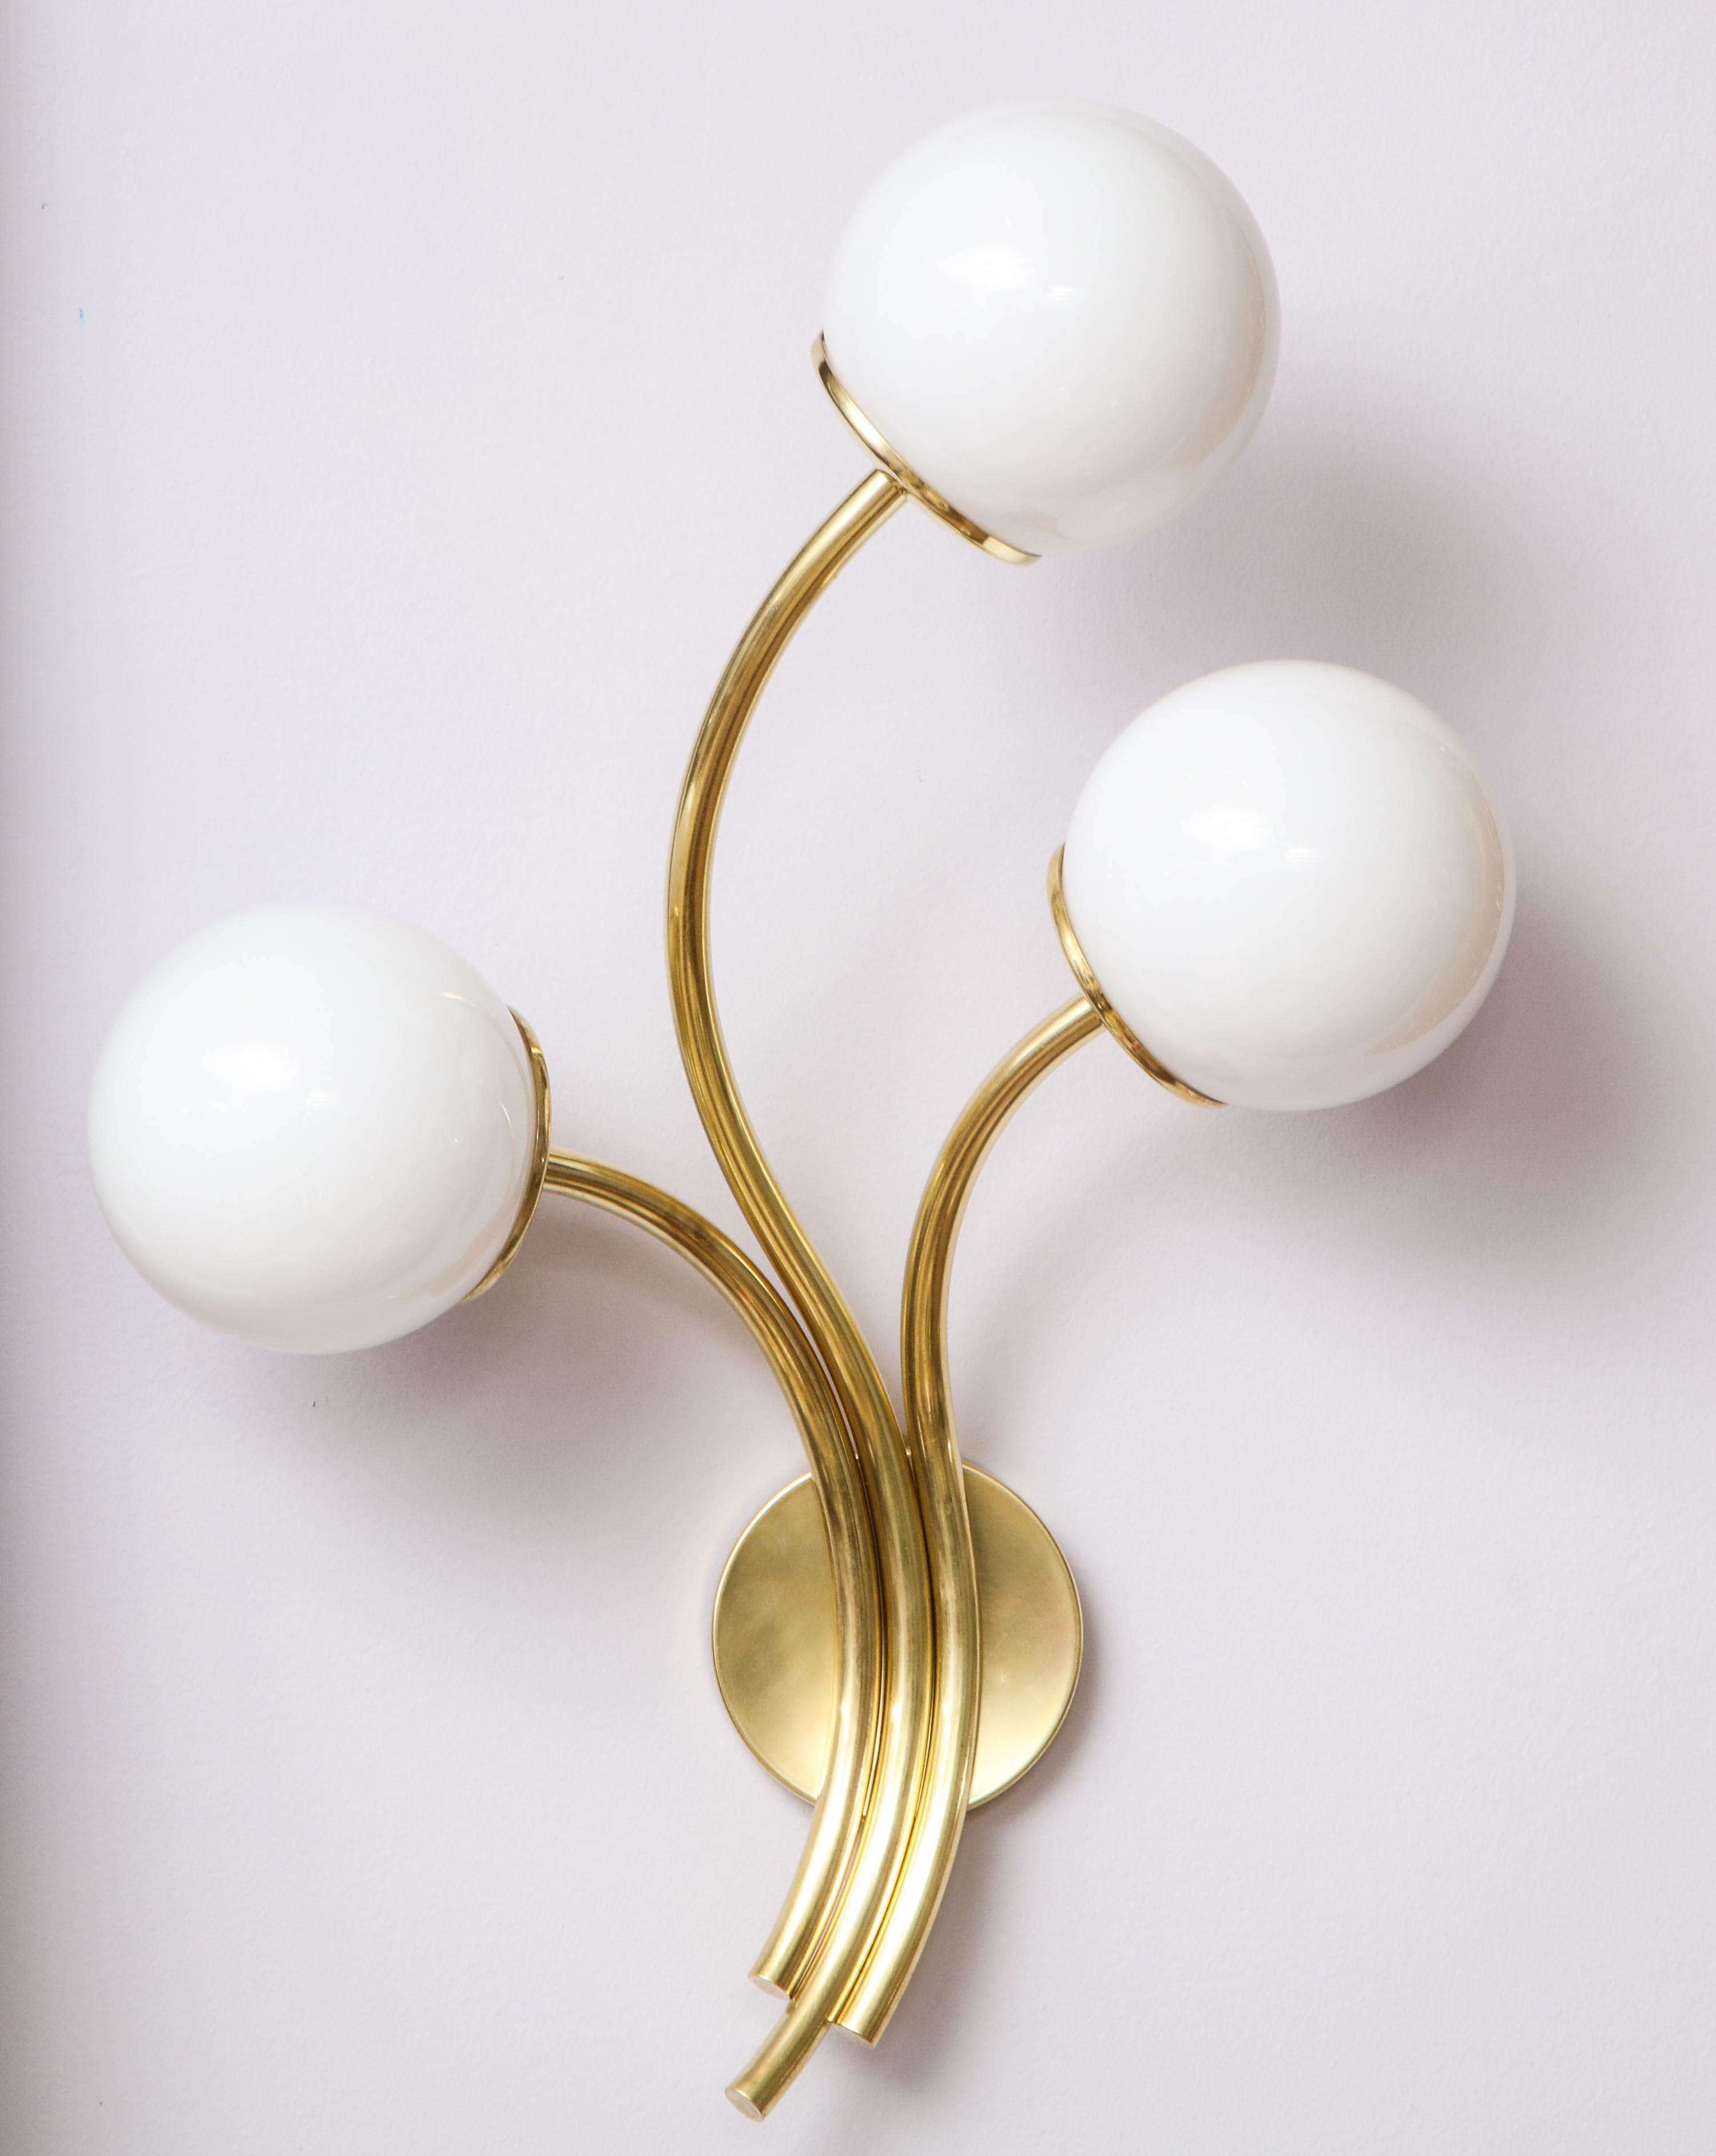 Pair of Italian three-light brass and opaline glass globe wall sconces. The three sconce arms extending from a wall-mounted circular brass plaque. Beautiful and organic design. (Re-wired for USA standards). 
Italy, circa 1950.
Size: 20